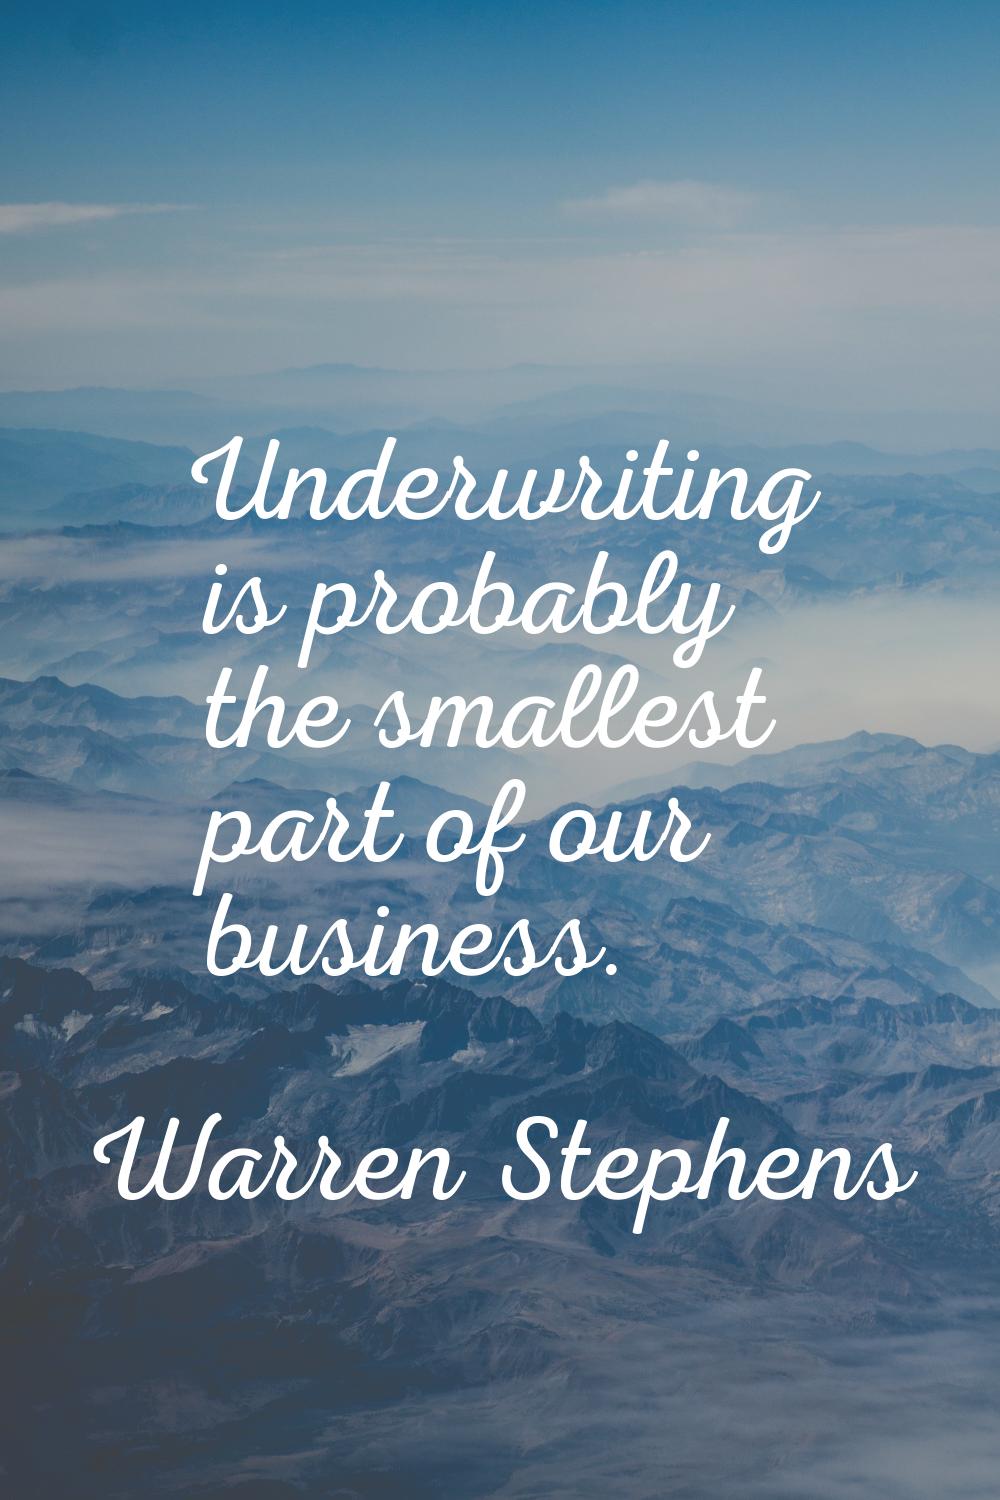 Underwriting is probably the smallest part of our business.